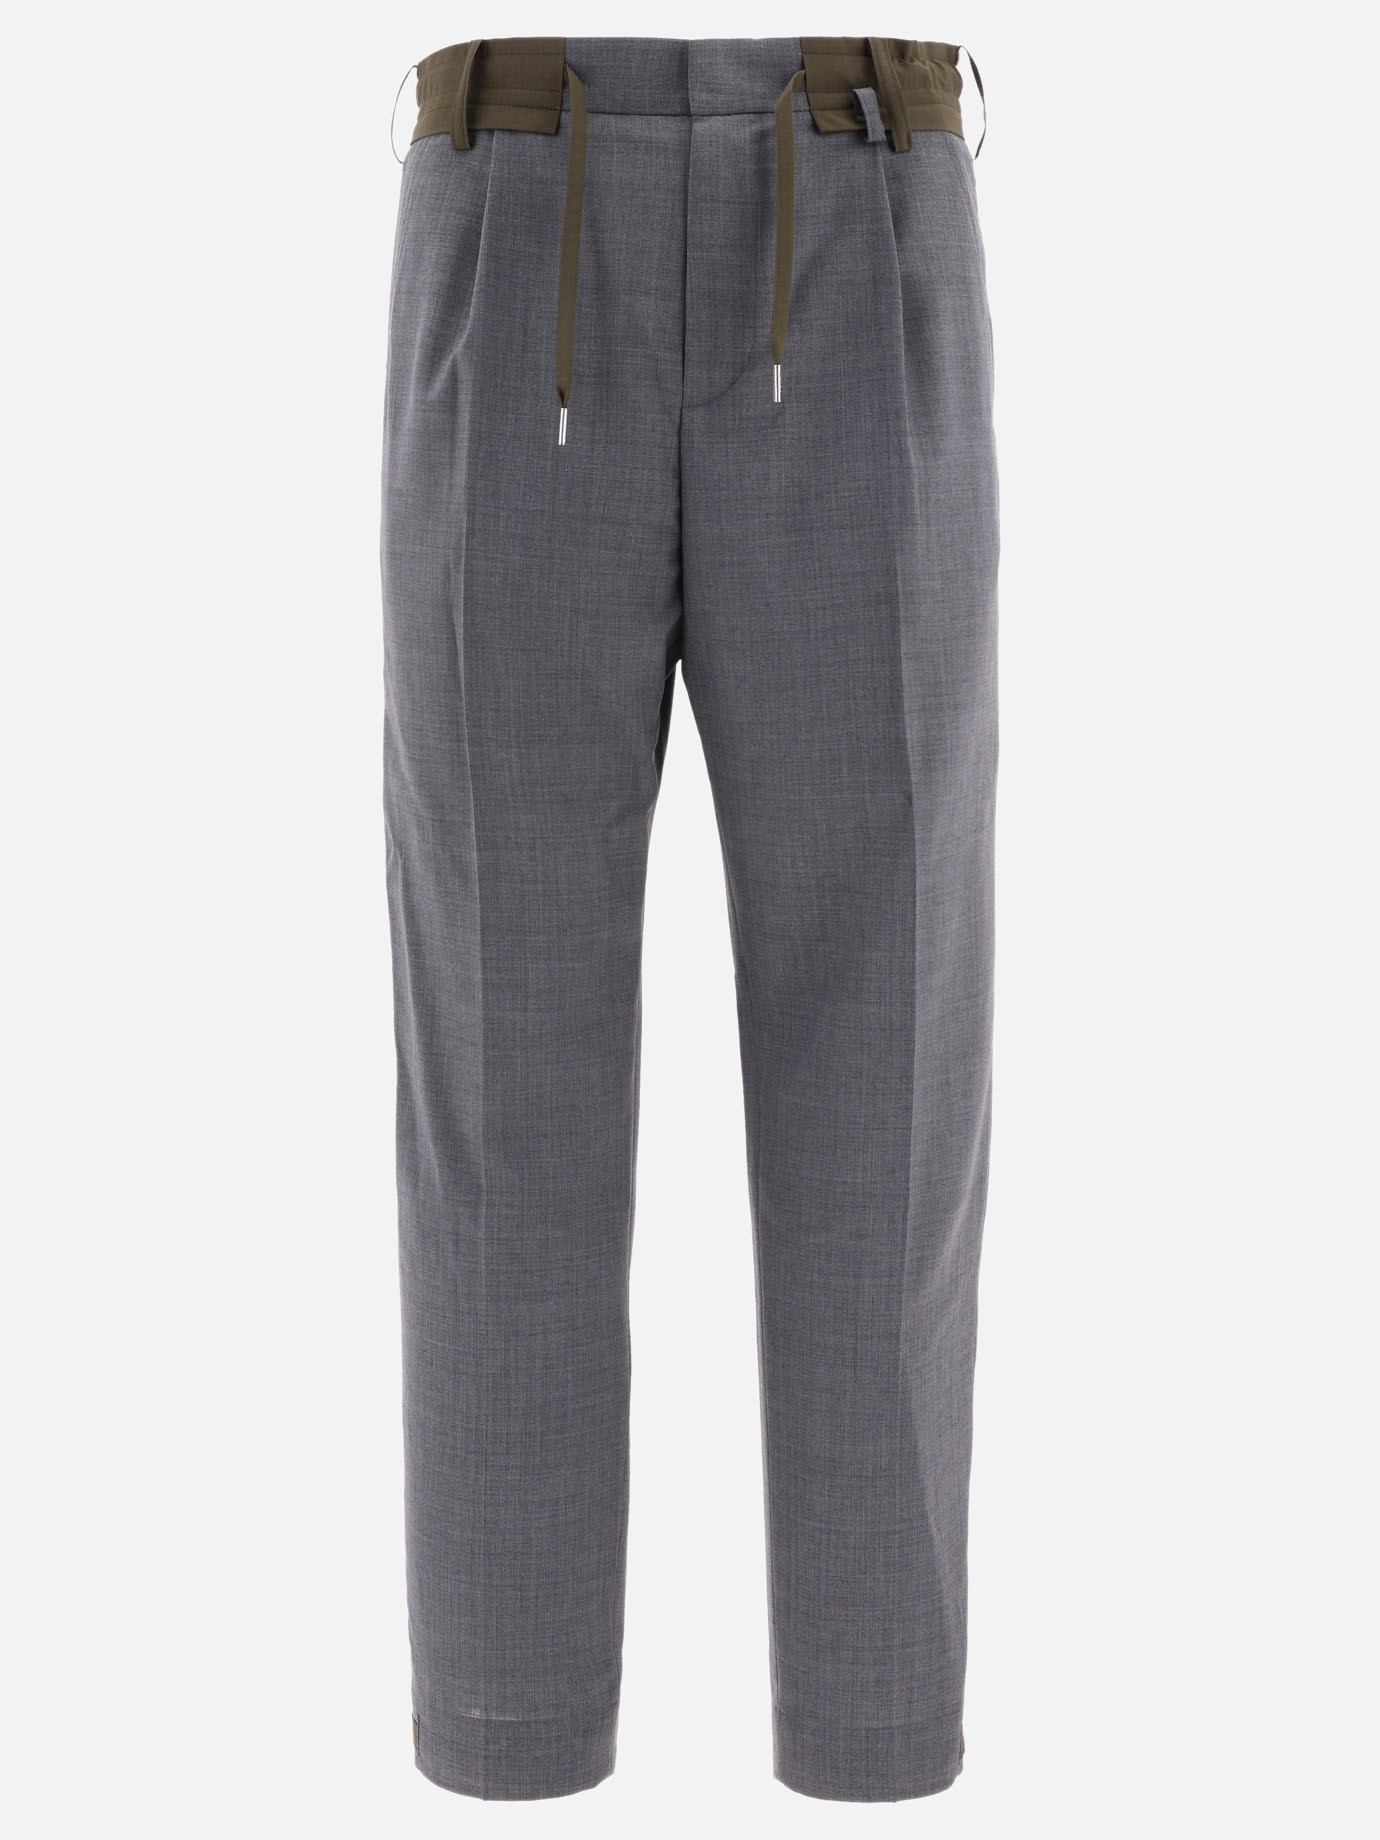 Tailored trousers with contrast detailsby Sacai - 0